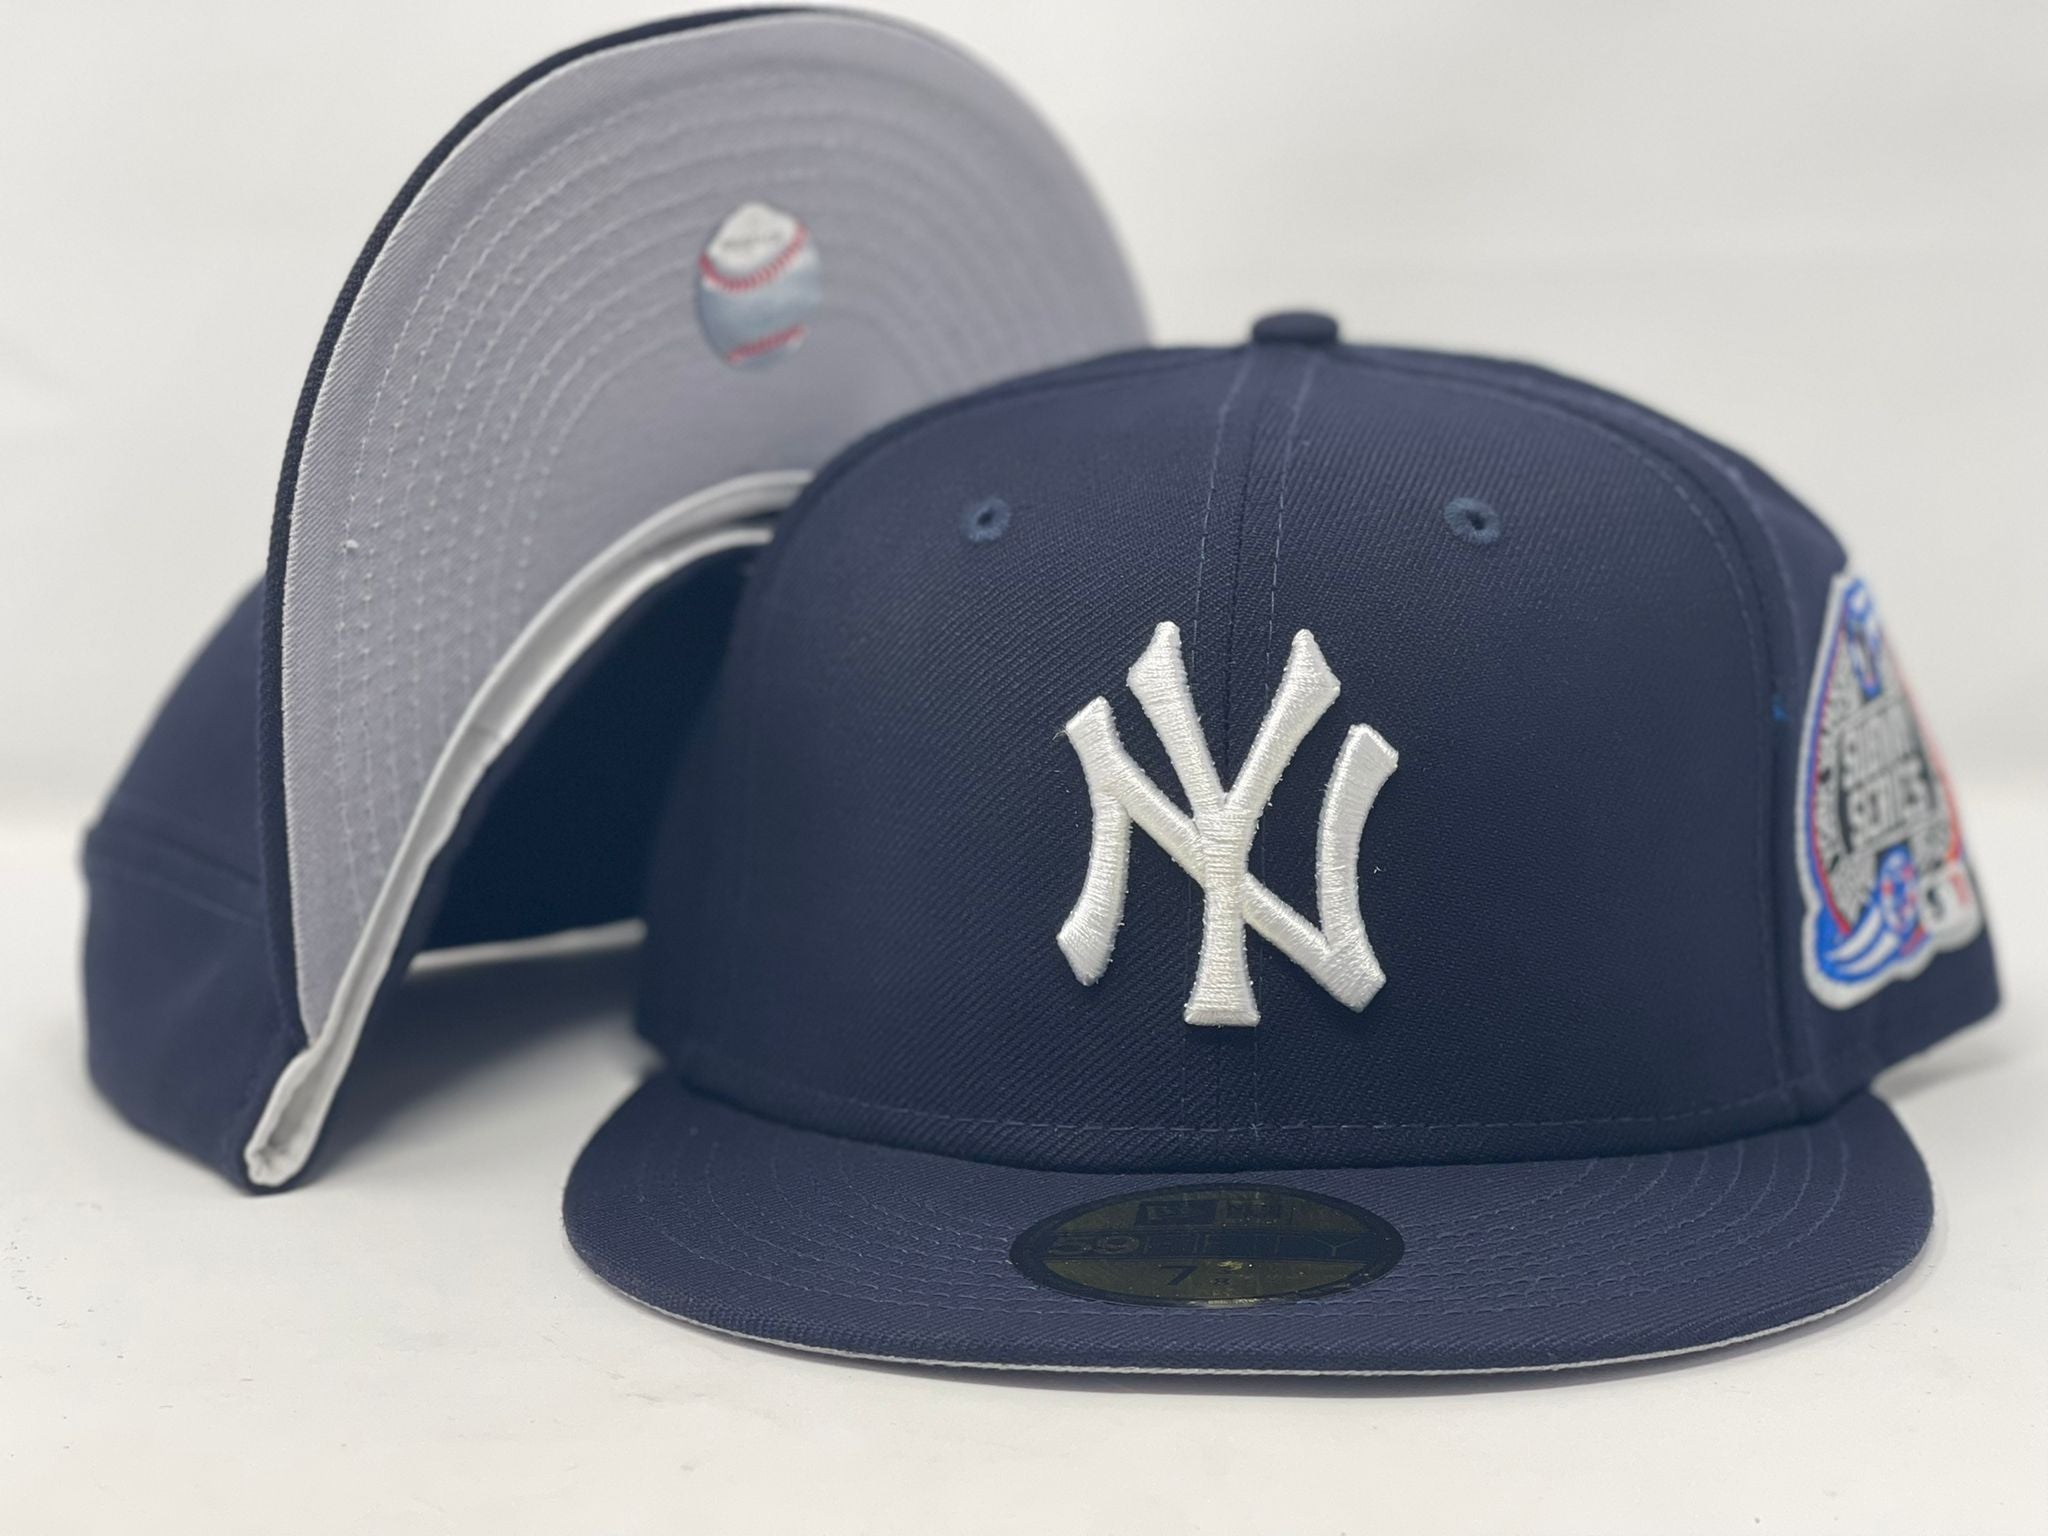 NEW ERA SUBWAY SERIES SIDE PATCH NY YANKEES FITTED HAT (NAVY